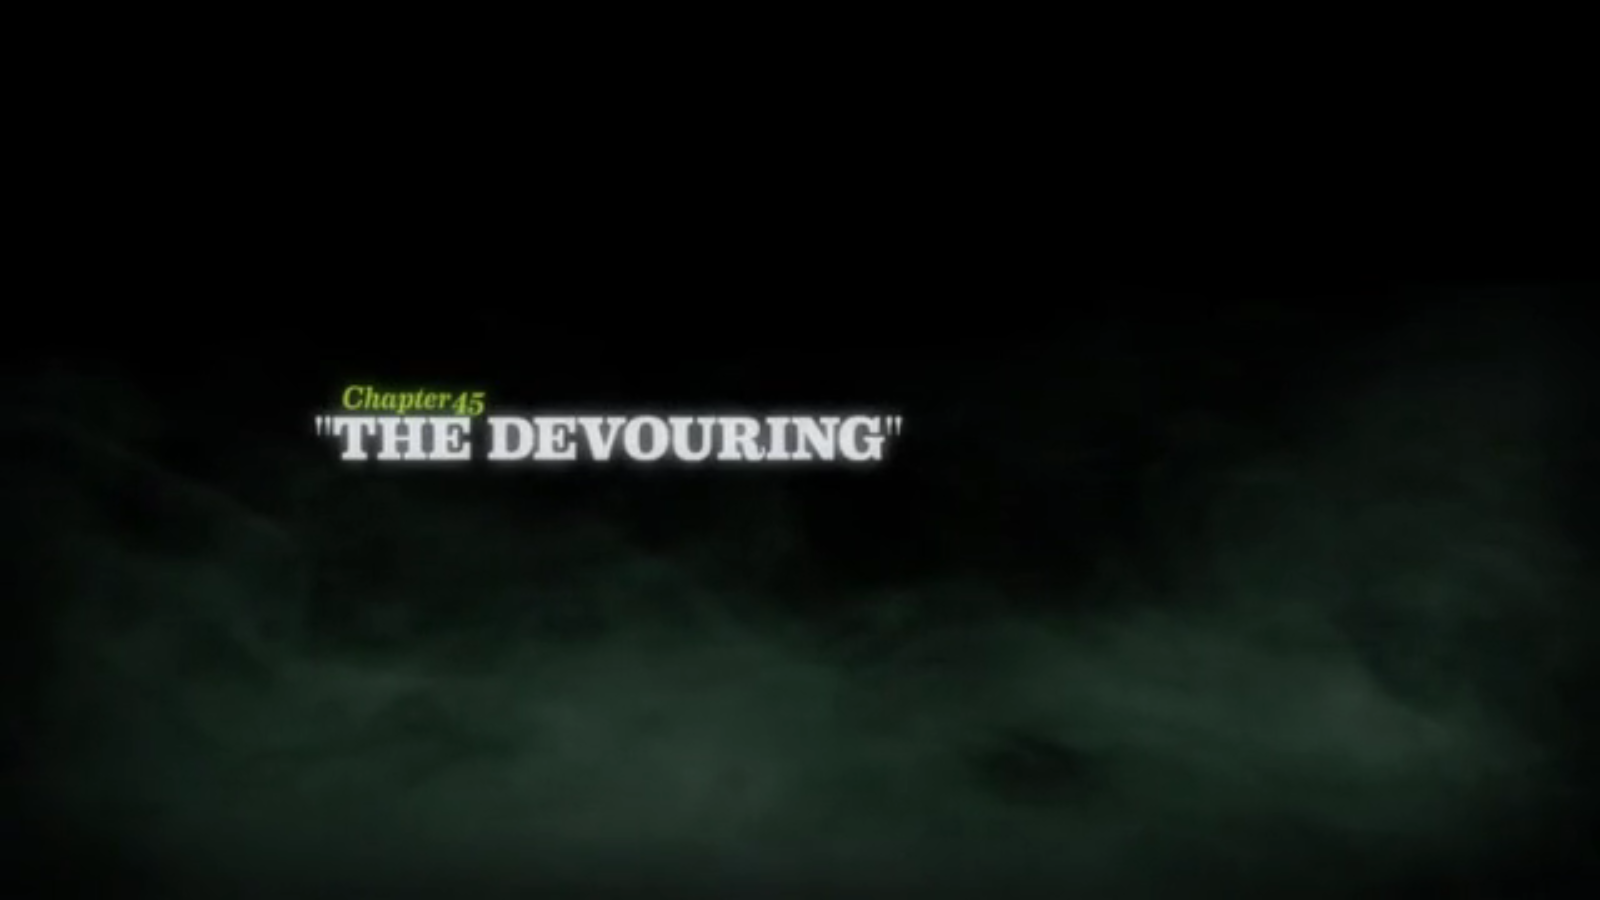 The_Devouring_title_card